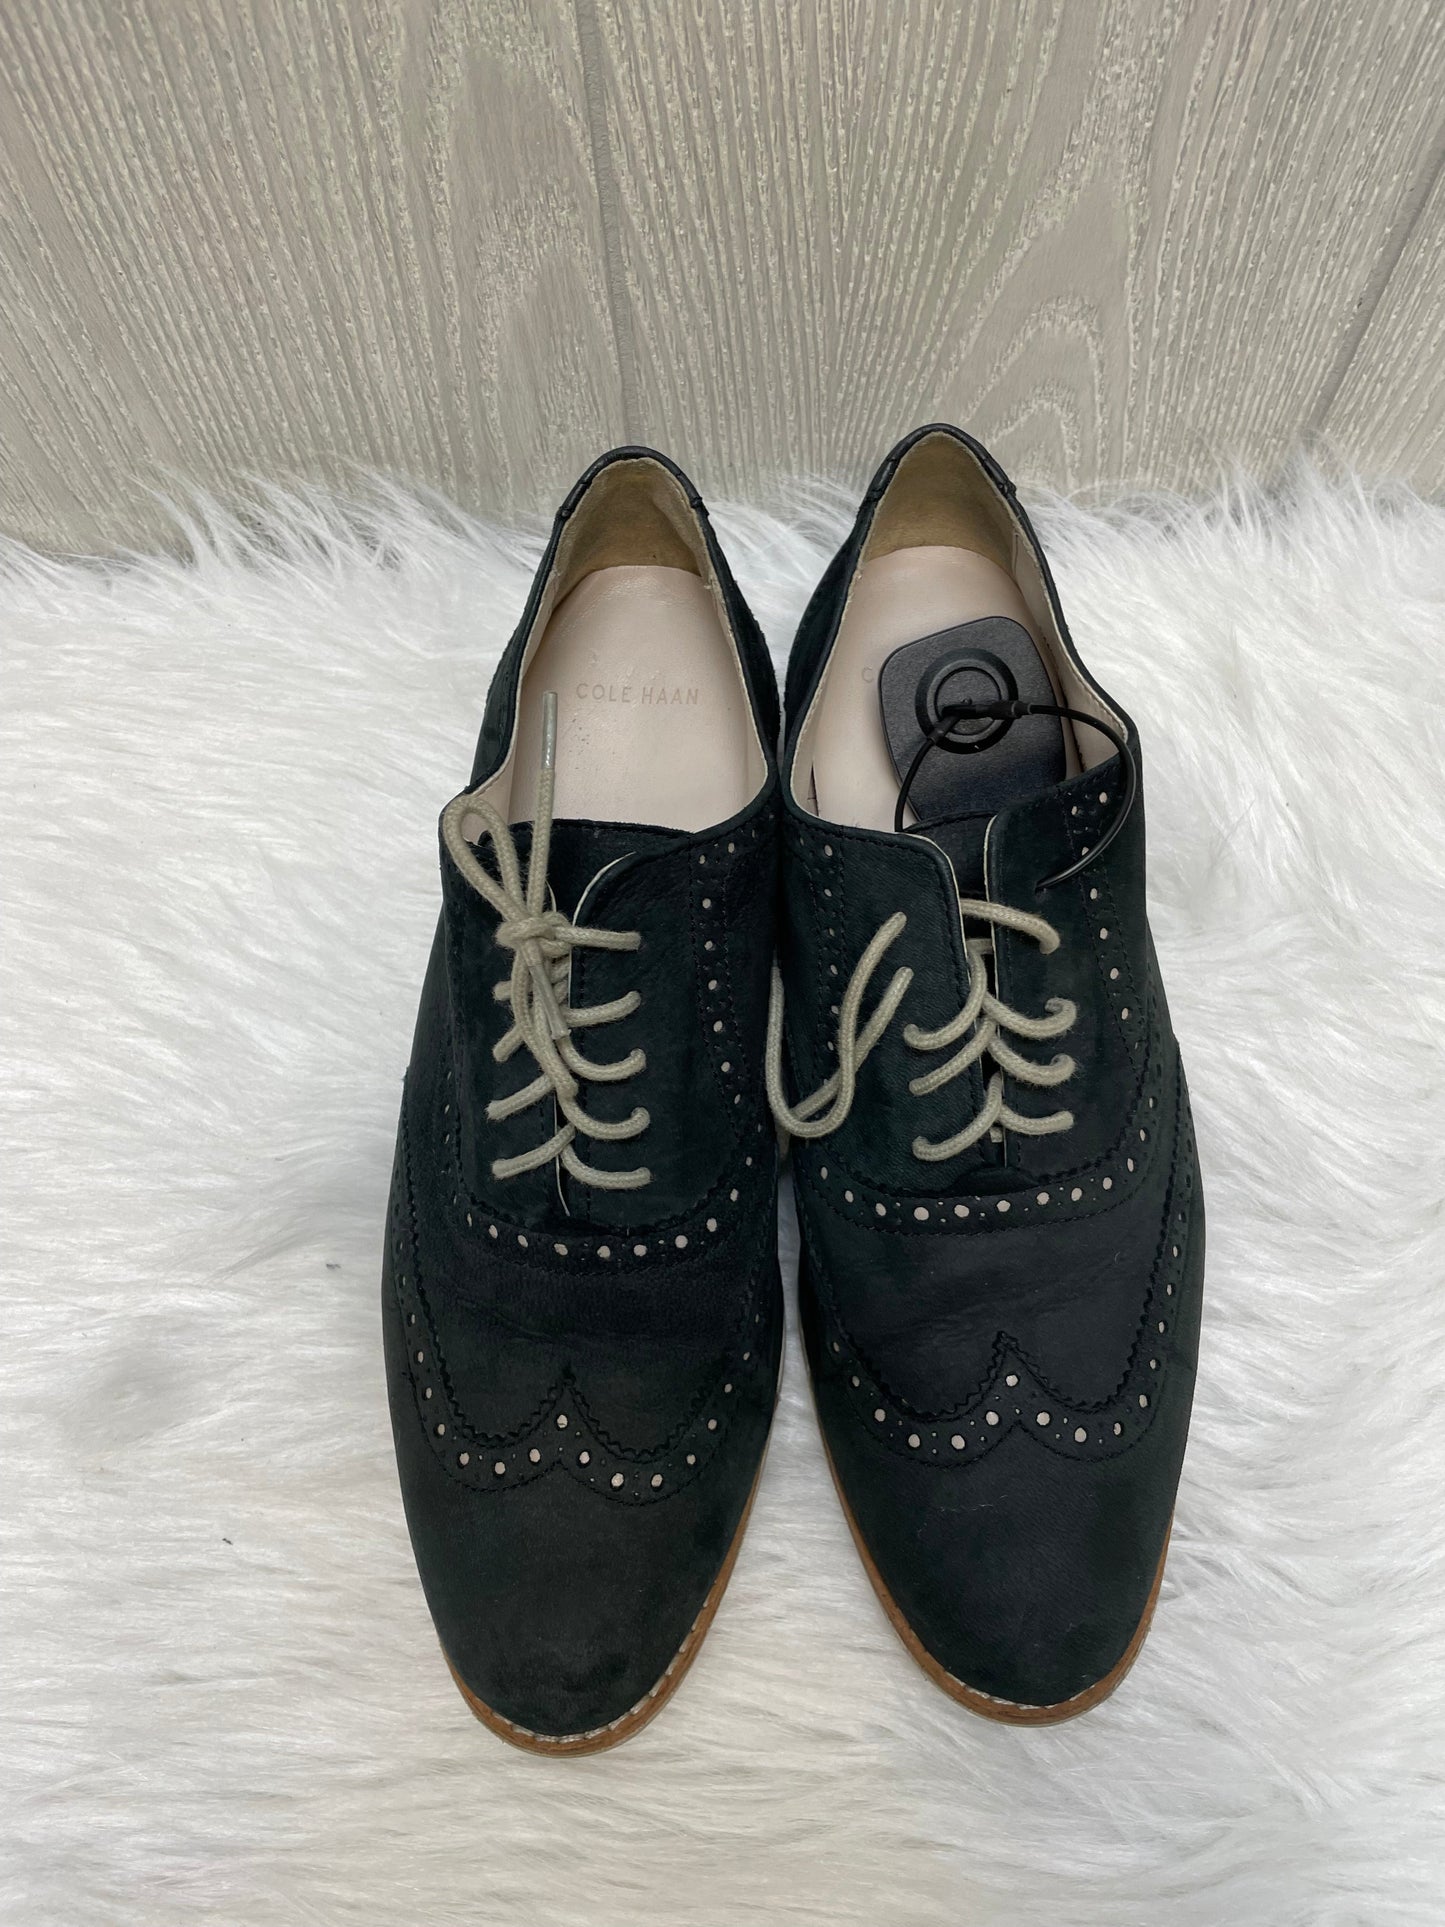 Navy Shoes Flats Cole-haan, Size 8.5